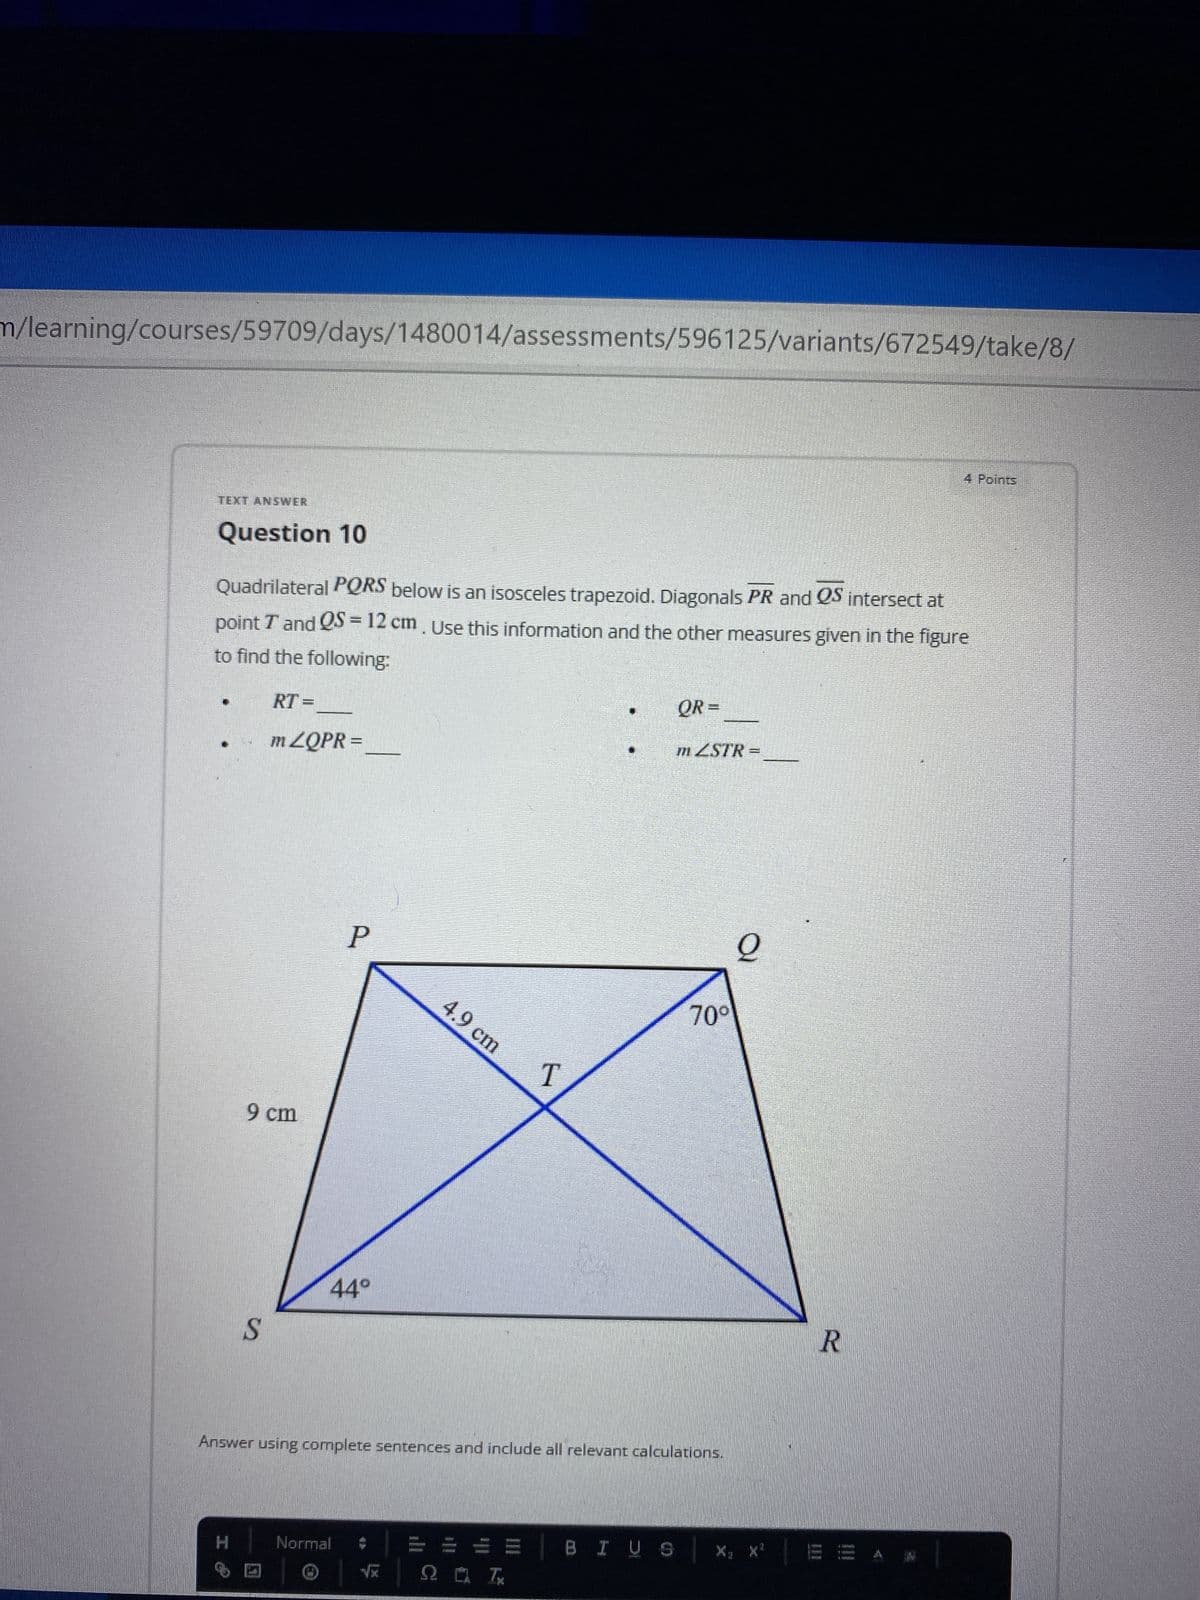 m/learning/courses/59709/days/1480014/assessments/596125/variants/672549/take/8/
4 Points
TEXT ANSWER
Question 10
Quadrilateral PQRS below is an isosceles trapezoid. Diagonals PR and QS intersect at
point T and QS = 12 cm. Use this information and the other measures given in the figure
to find the following:
RT=
QR=
m ZQPR =
mZSTR=
오
P
4.9 cm
70°
T
9 cm
44°
S
Answer using complete sentences and include all relevant calculations.
Wi
www
BIUS
Tere!
H
Normal
JENTER
HIMU
2 I
7
R
Istal